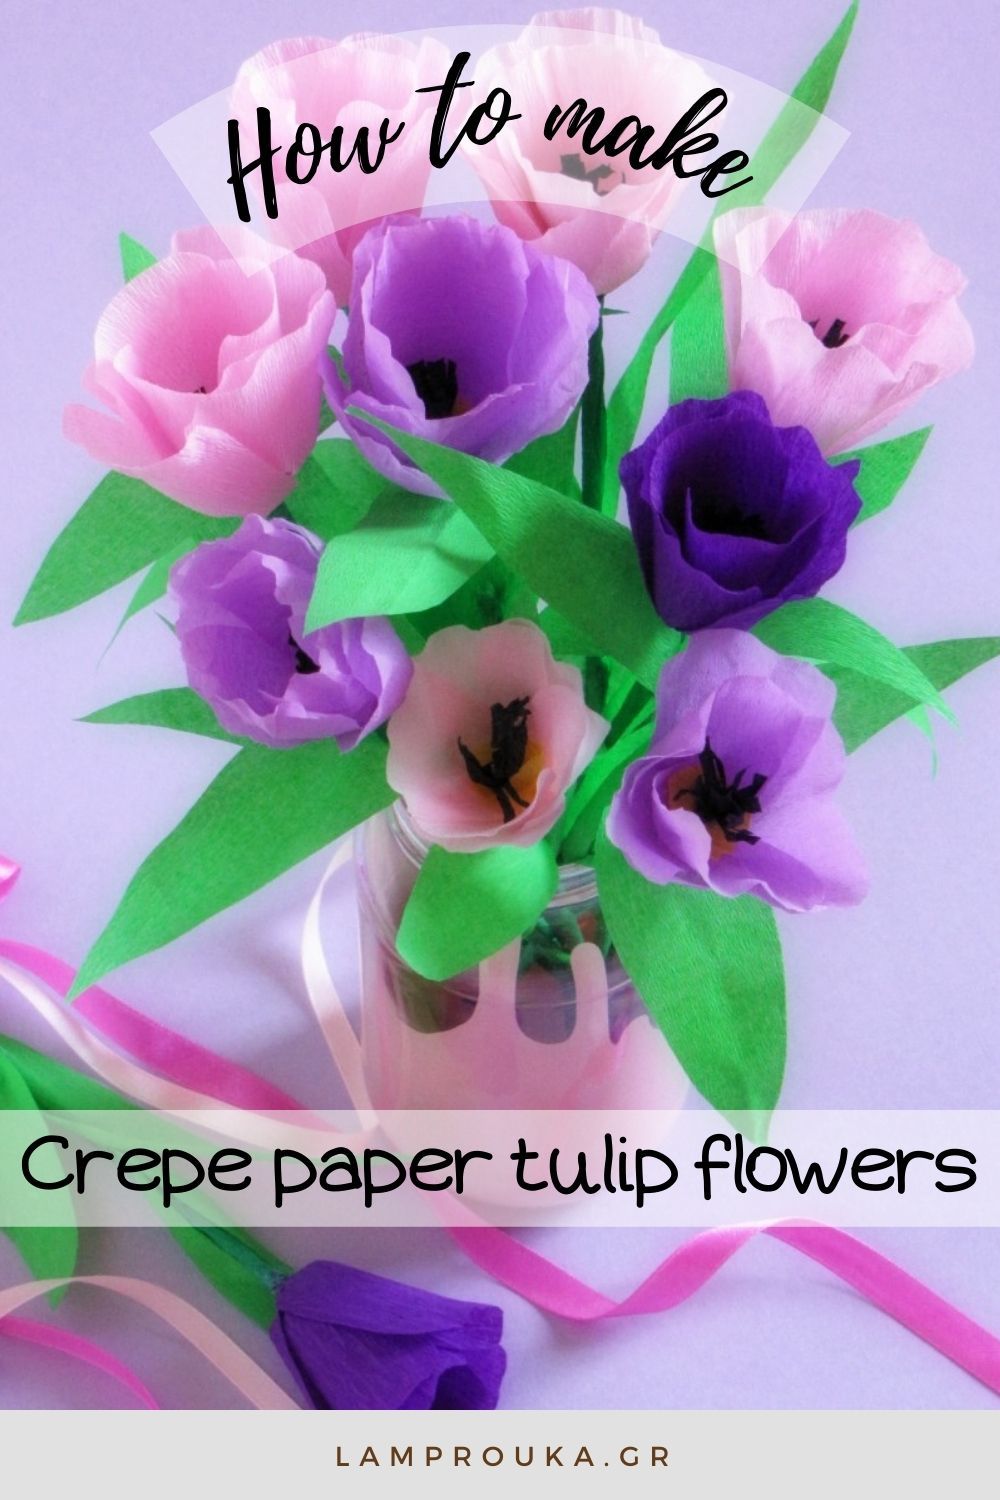 How To Make Crepe Paper Tulip Flowers